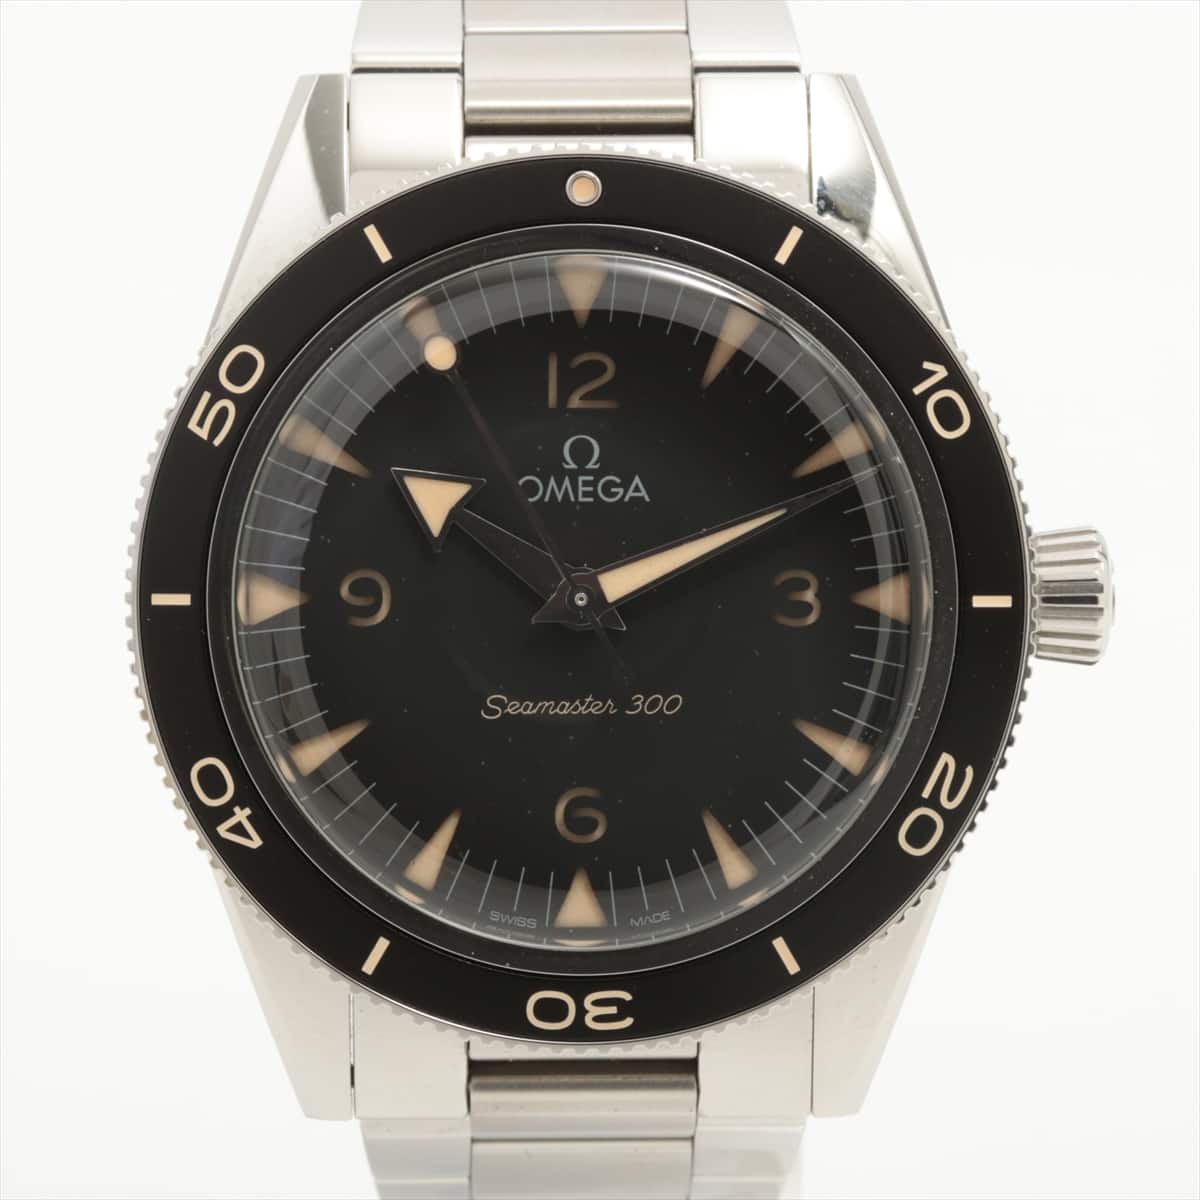 Omega Seamaster 300 Coaxial Master chronometer 234.30.41.21.01.001 SS AT Black-Face Extra-Link 5